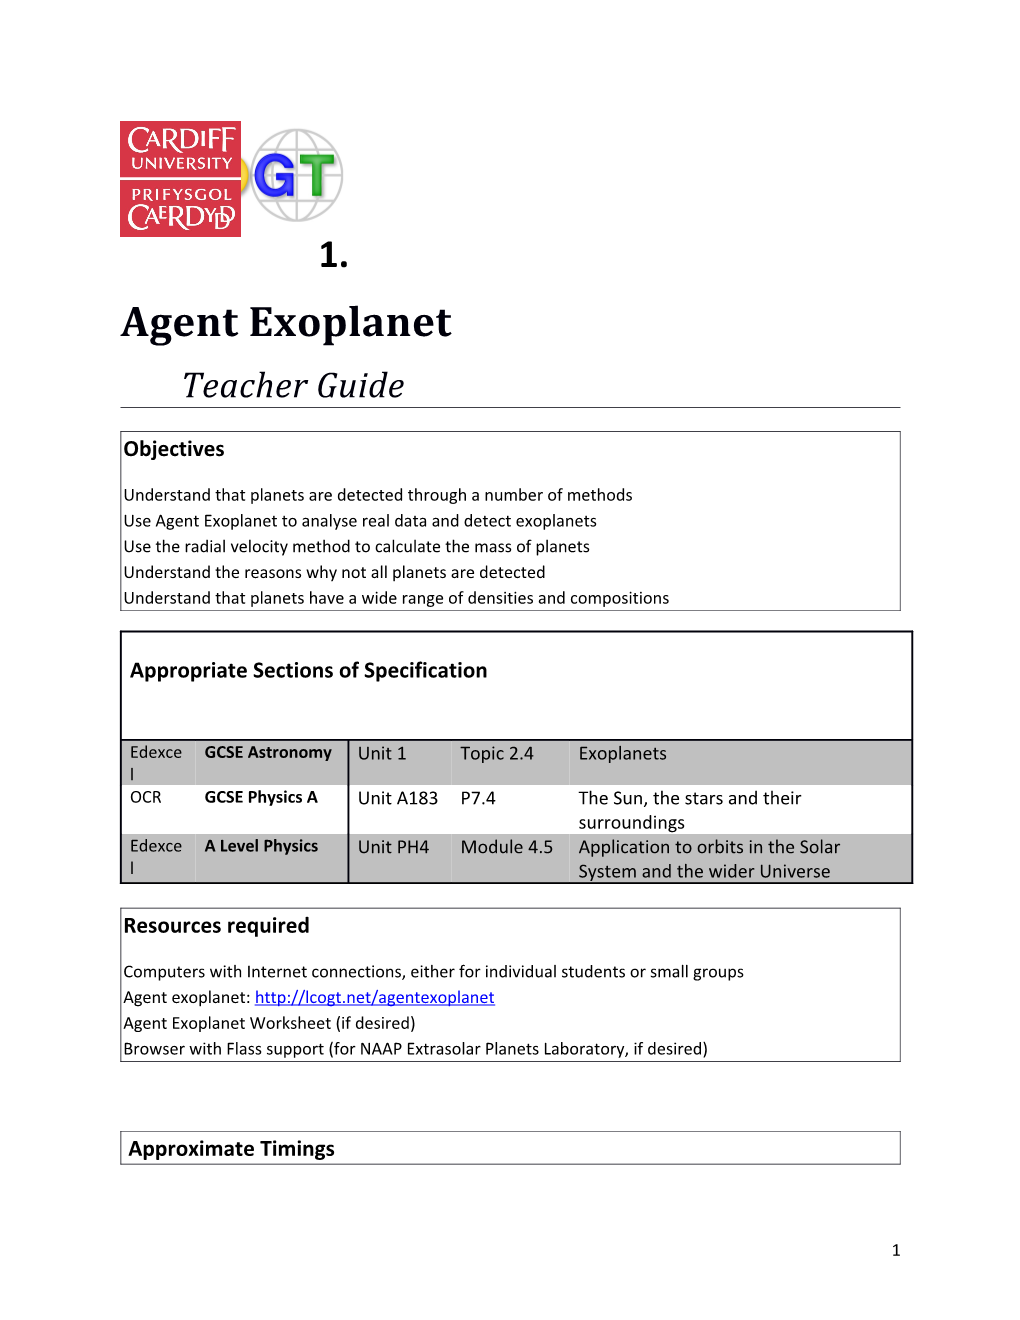 Agent Exoplanet Teacher Resource to Share